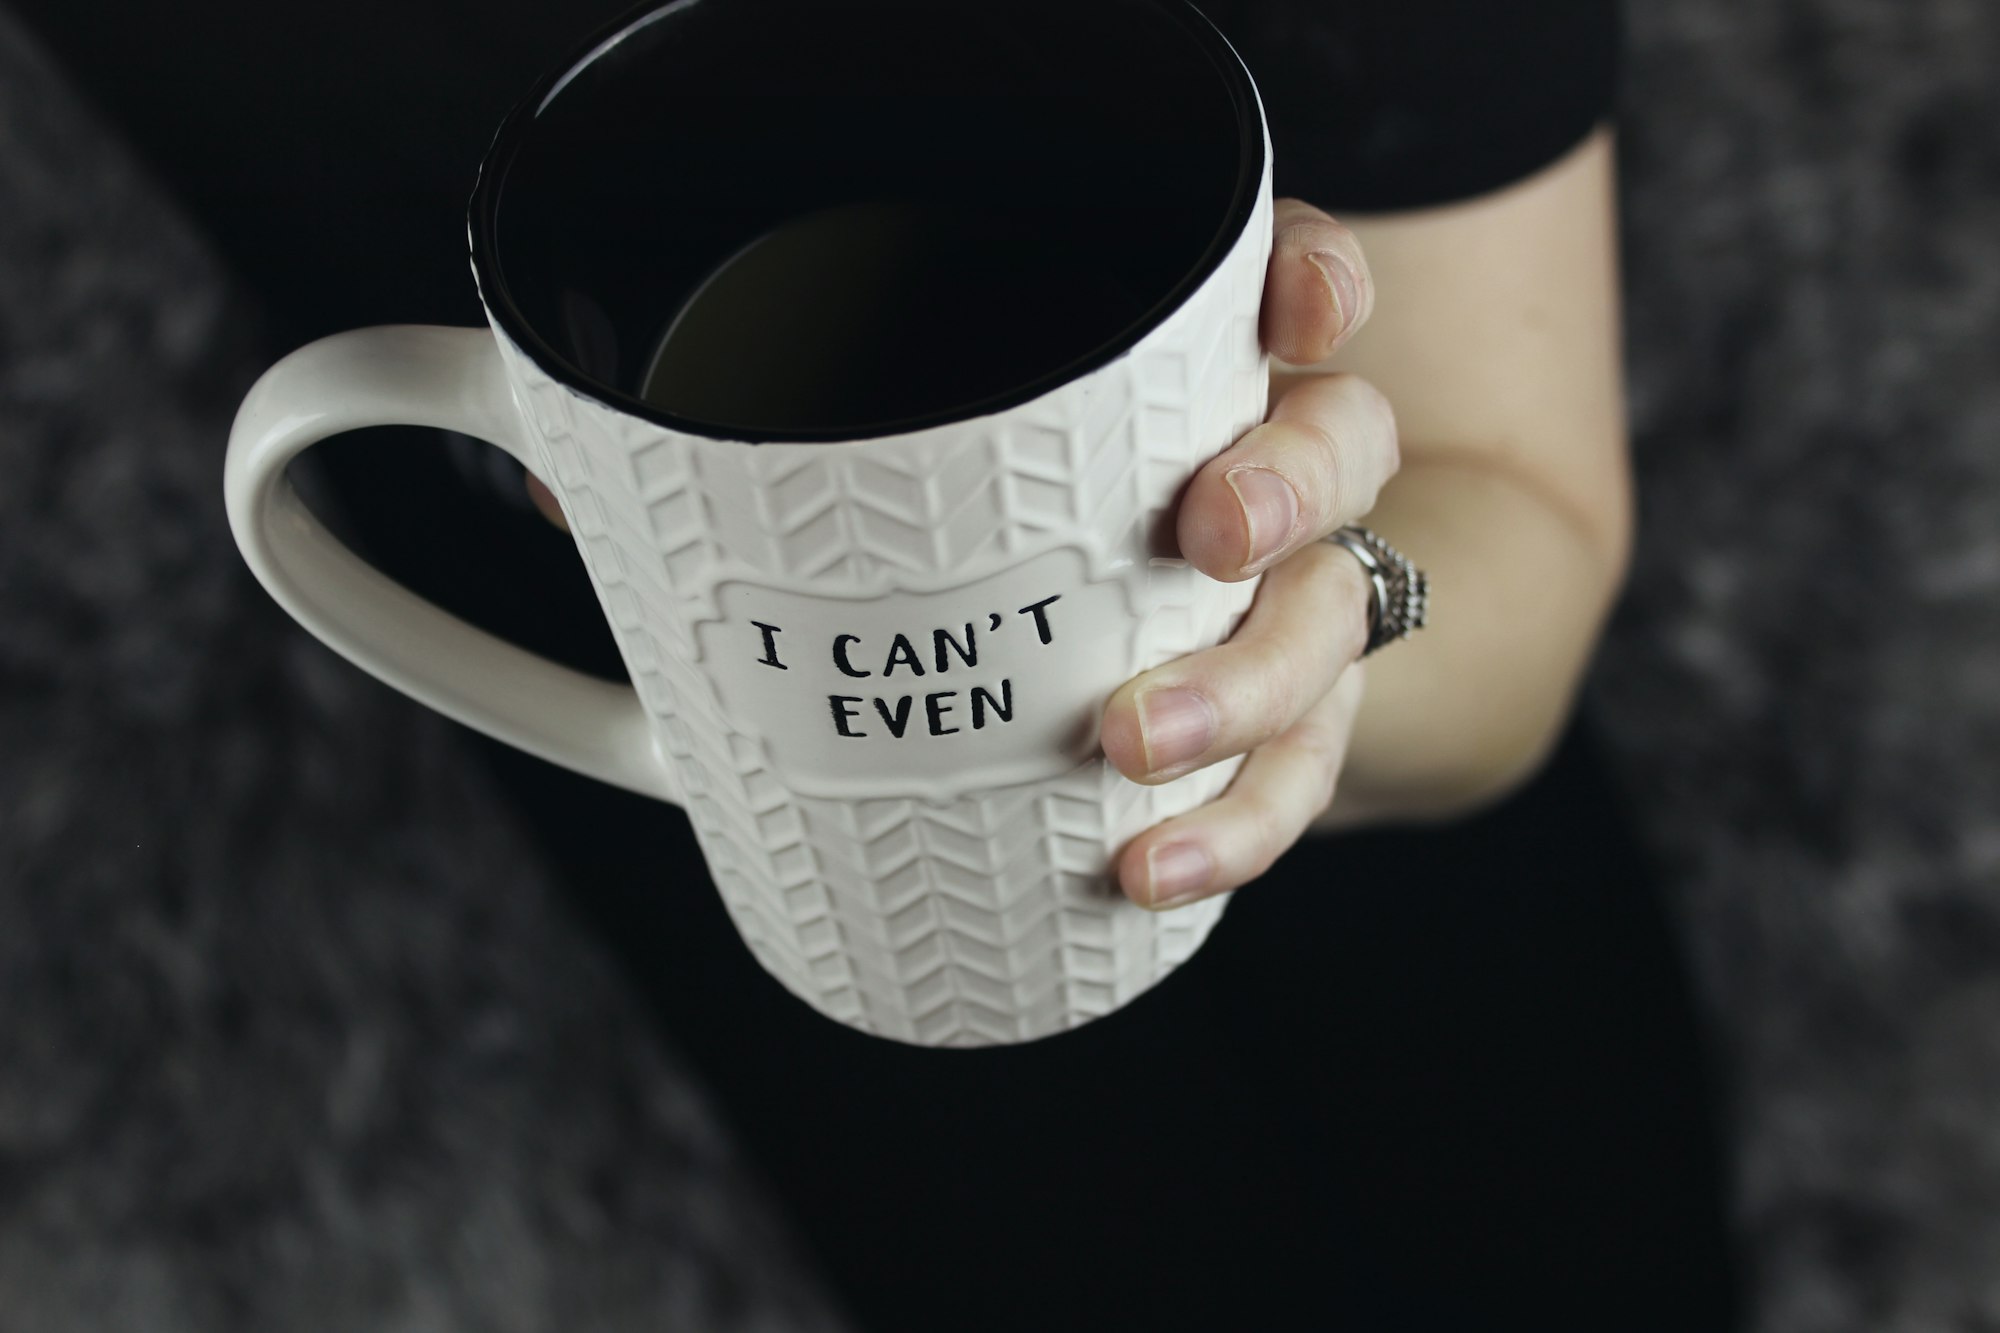 For those mornings when getting out of bed seems like the most difficult task in the world, this white coffee mug with herringbone pattern and texture tells it like it is: "I can't even..." held in a woman's hand with large wedding ring against a dark background.